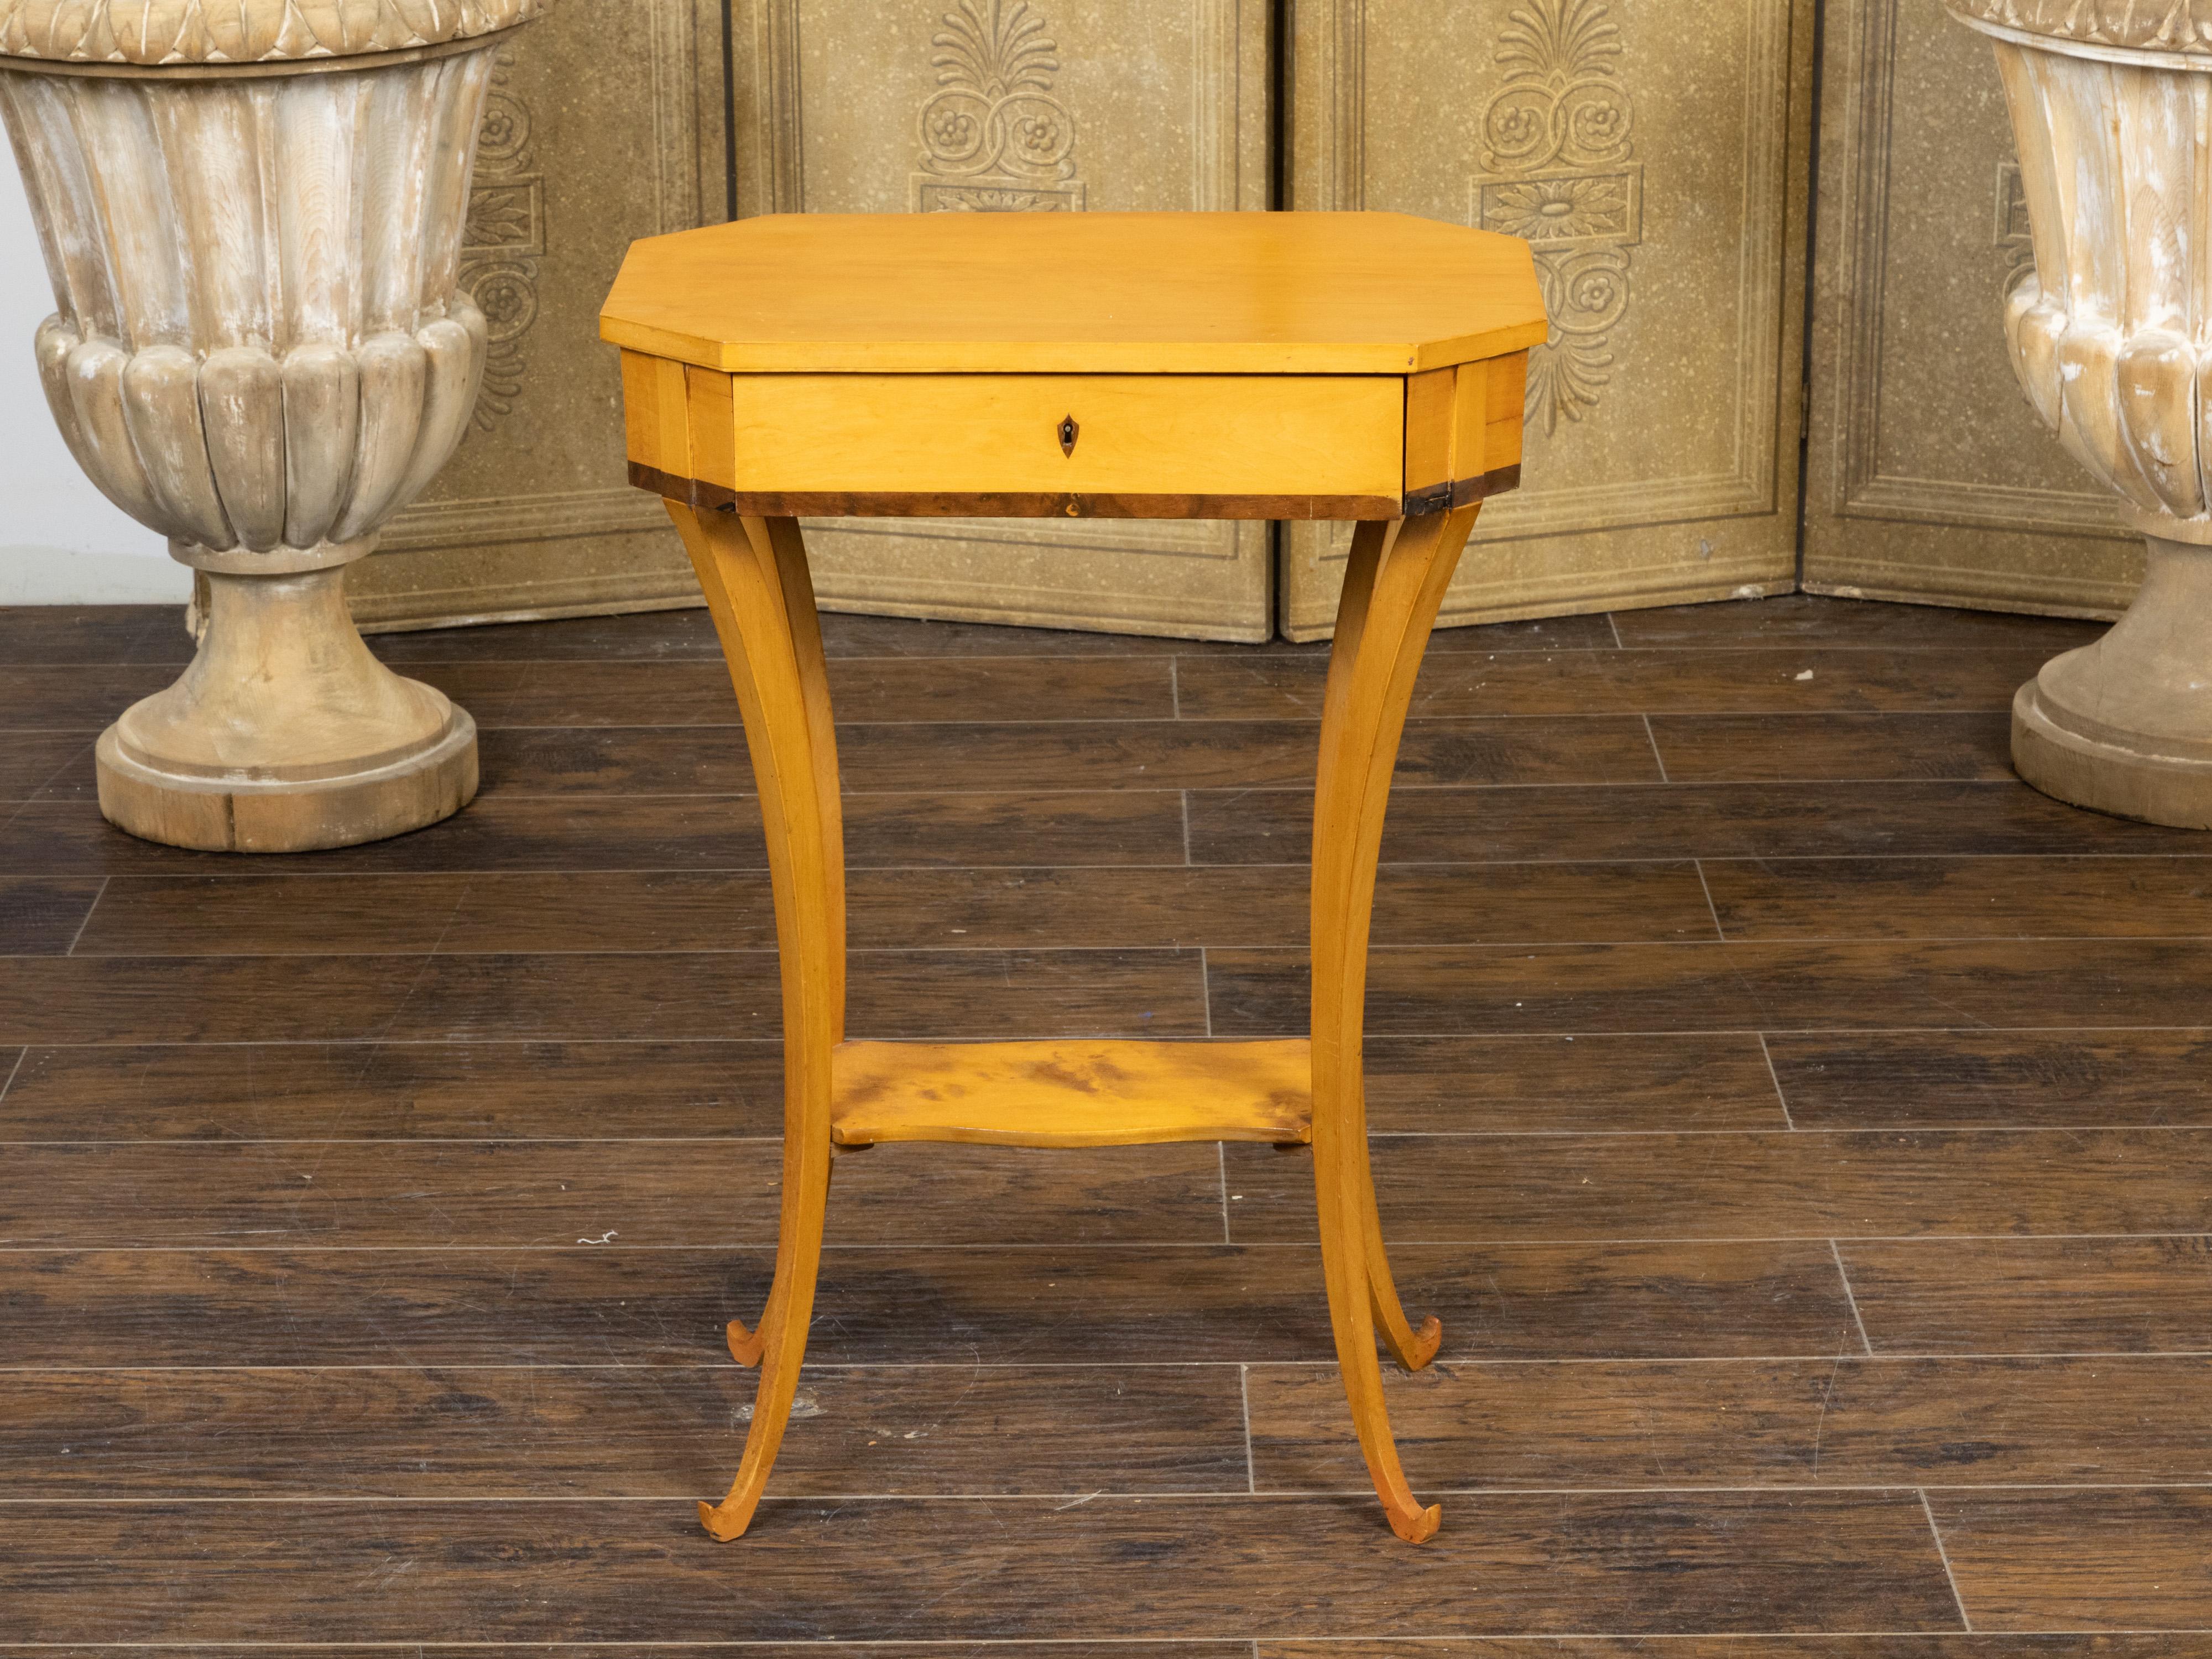 An Austrian Biedermeier period end table from the mid 19th century, with octagonal top, darker accentuation, partitioned drawer, saber legs and lower shelf. Created in Austria during the Biedermeier period in the second quarter of the 19th century,